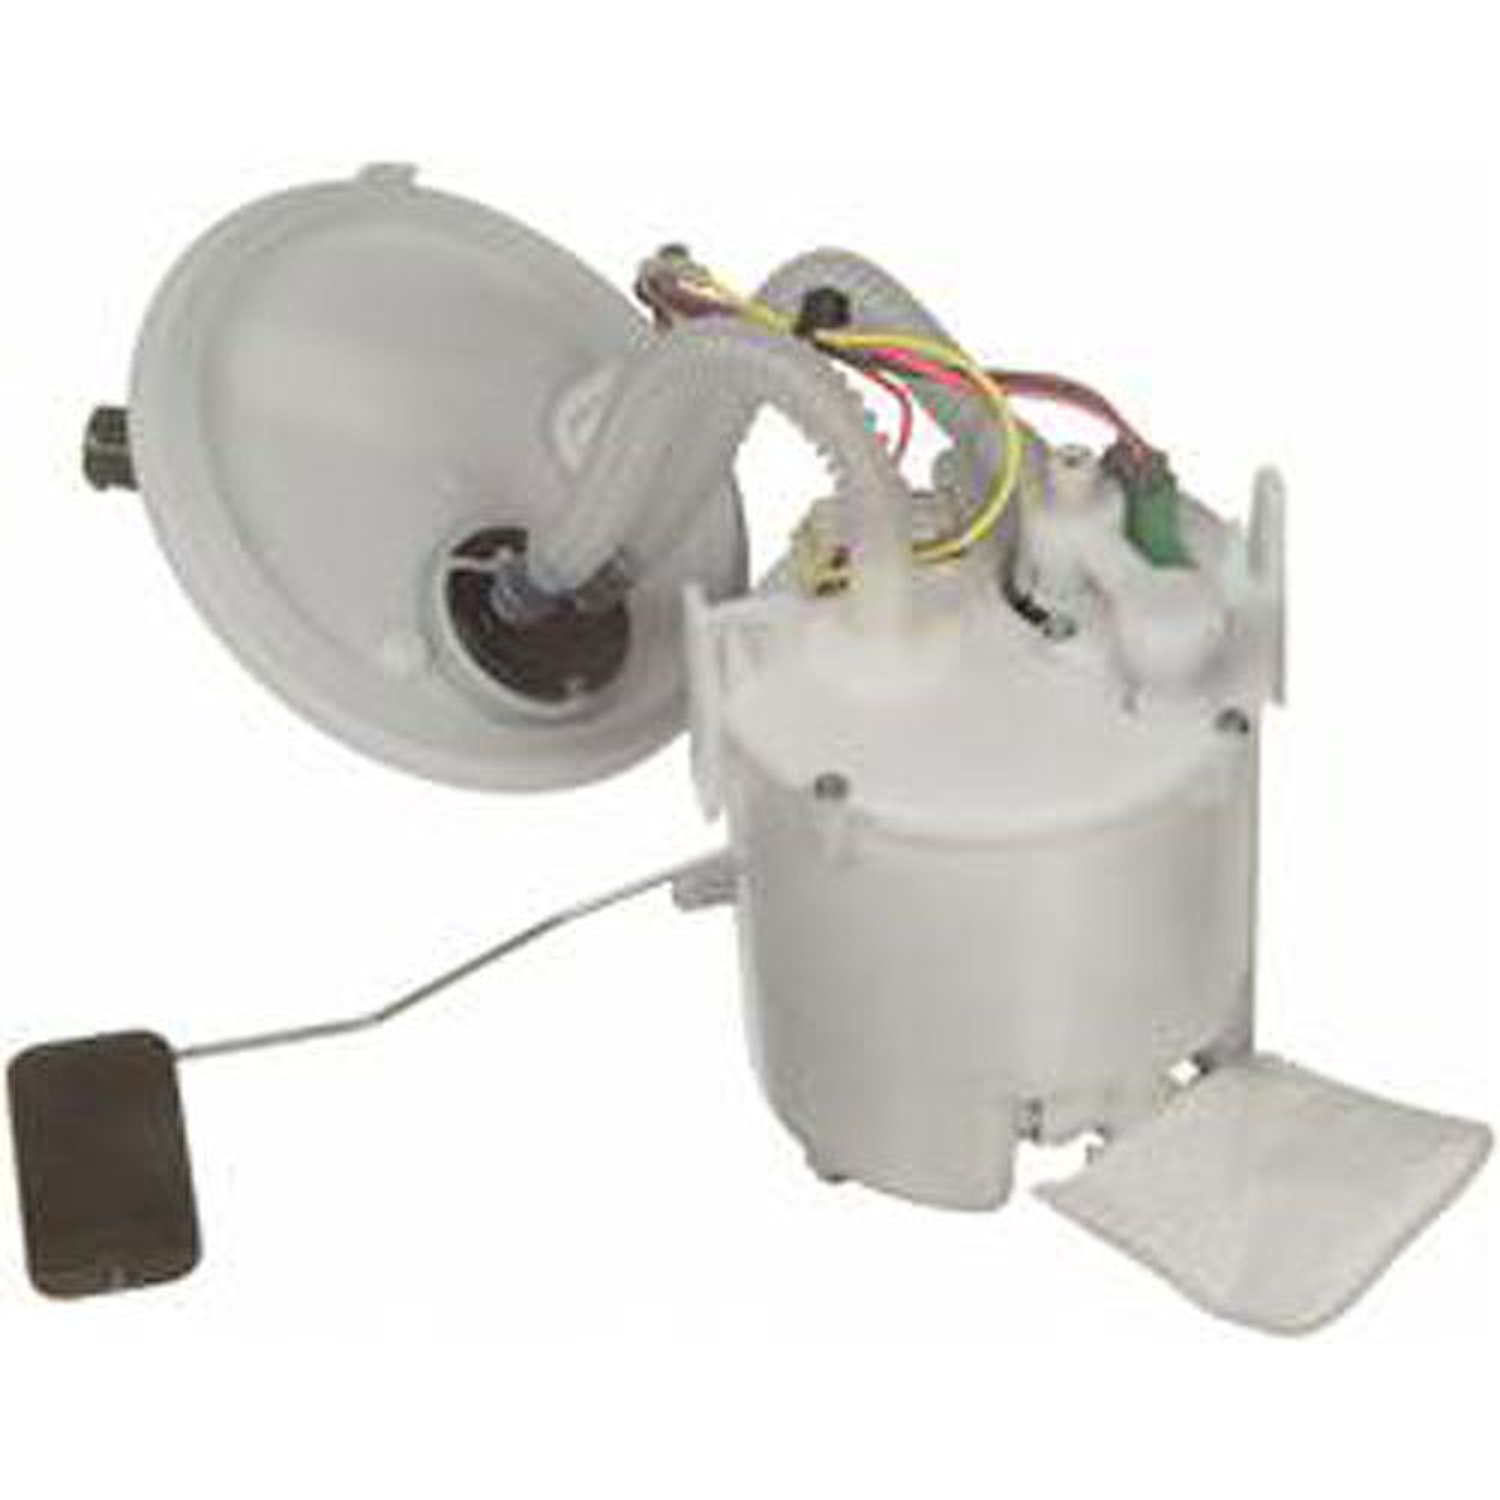 OE Ford Replacement Electric Fuel Pump Module Assembly 2000-02 Ford Thunderbird 3.9L V6